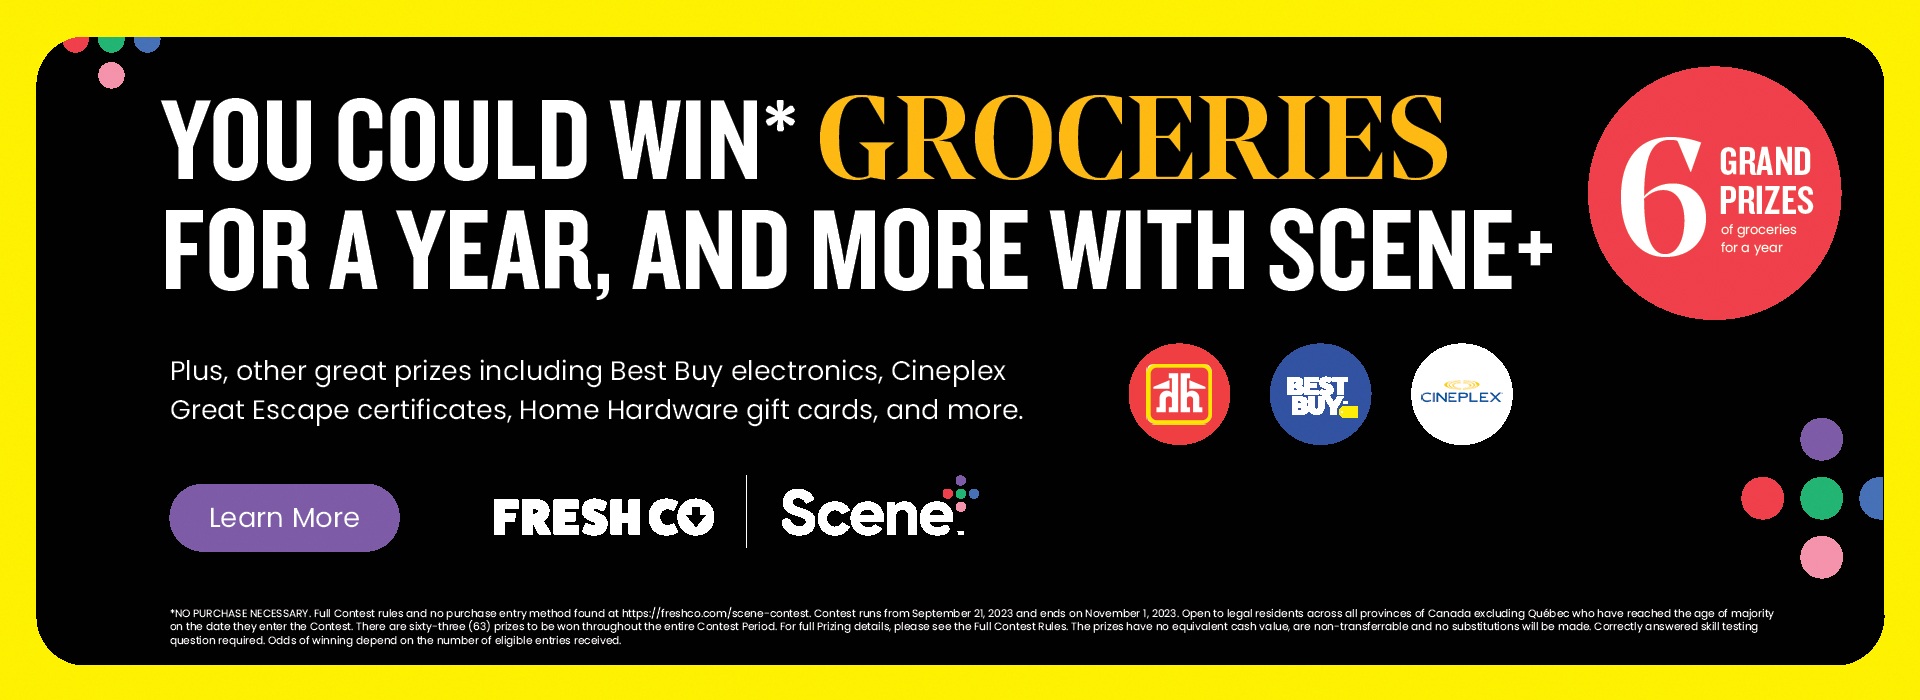 Text Reading " You could win* Groceries for a year, and more with scene+. Plus other greaat prices including Best Buy electronics, Cineplex. Great Escape certificates, Home Hardware gift cards, and more."